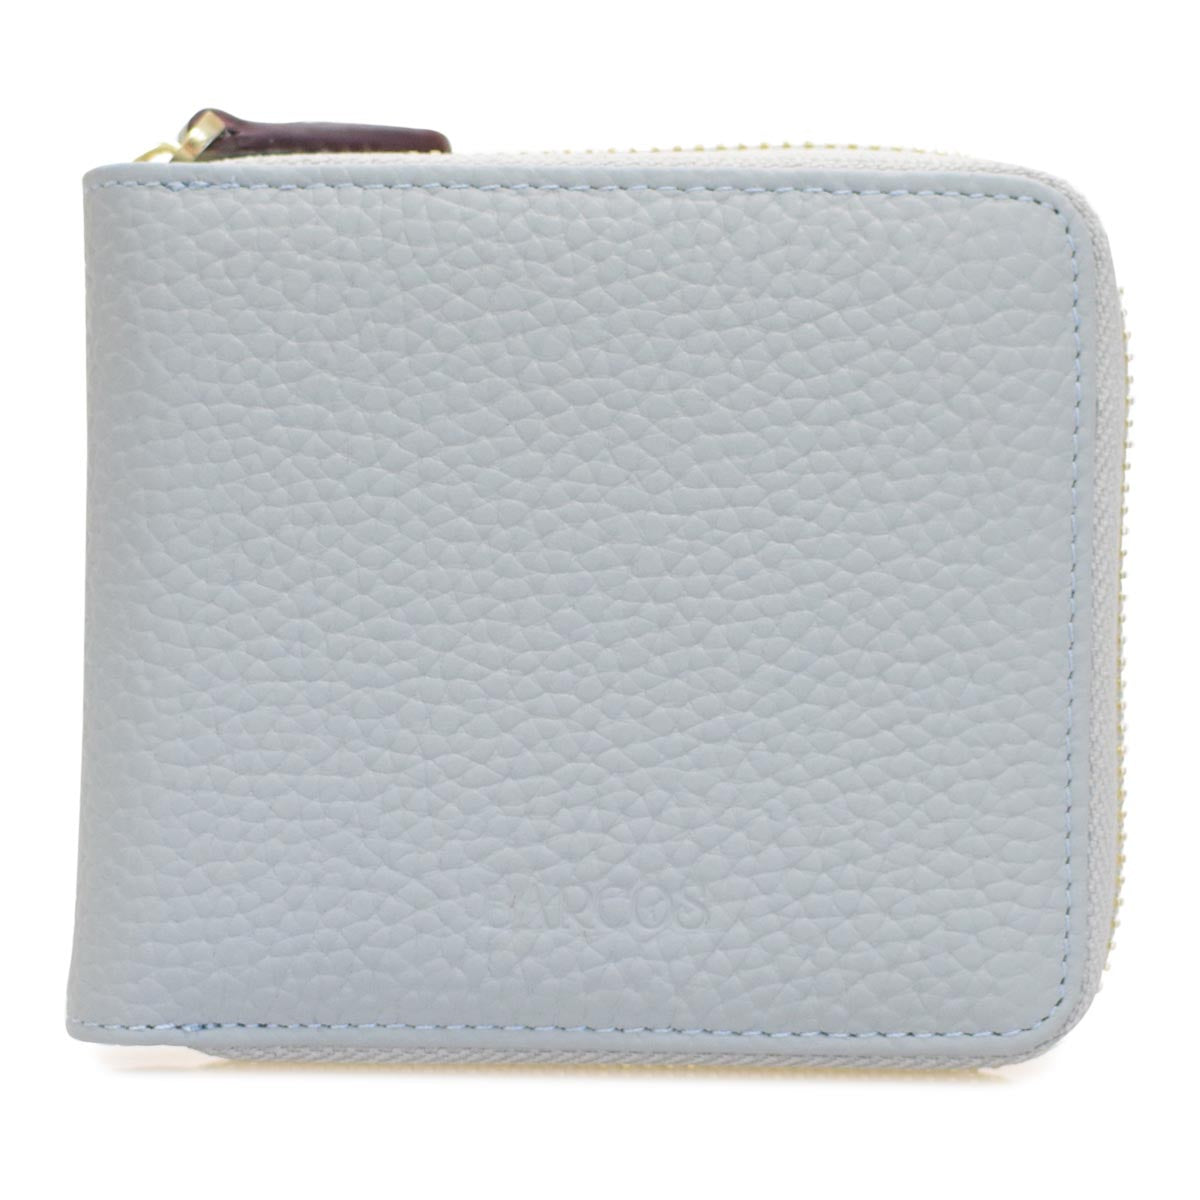 Small All Around Zip Wallet